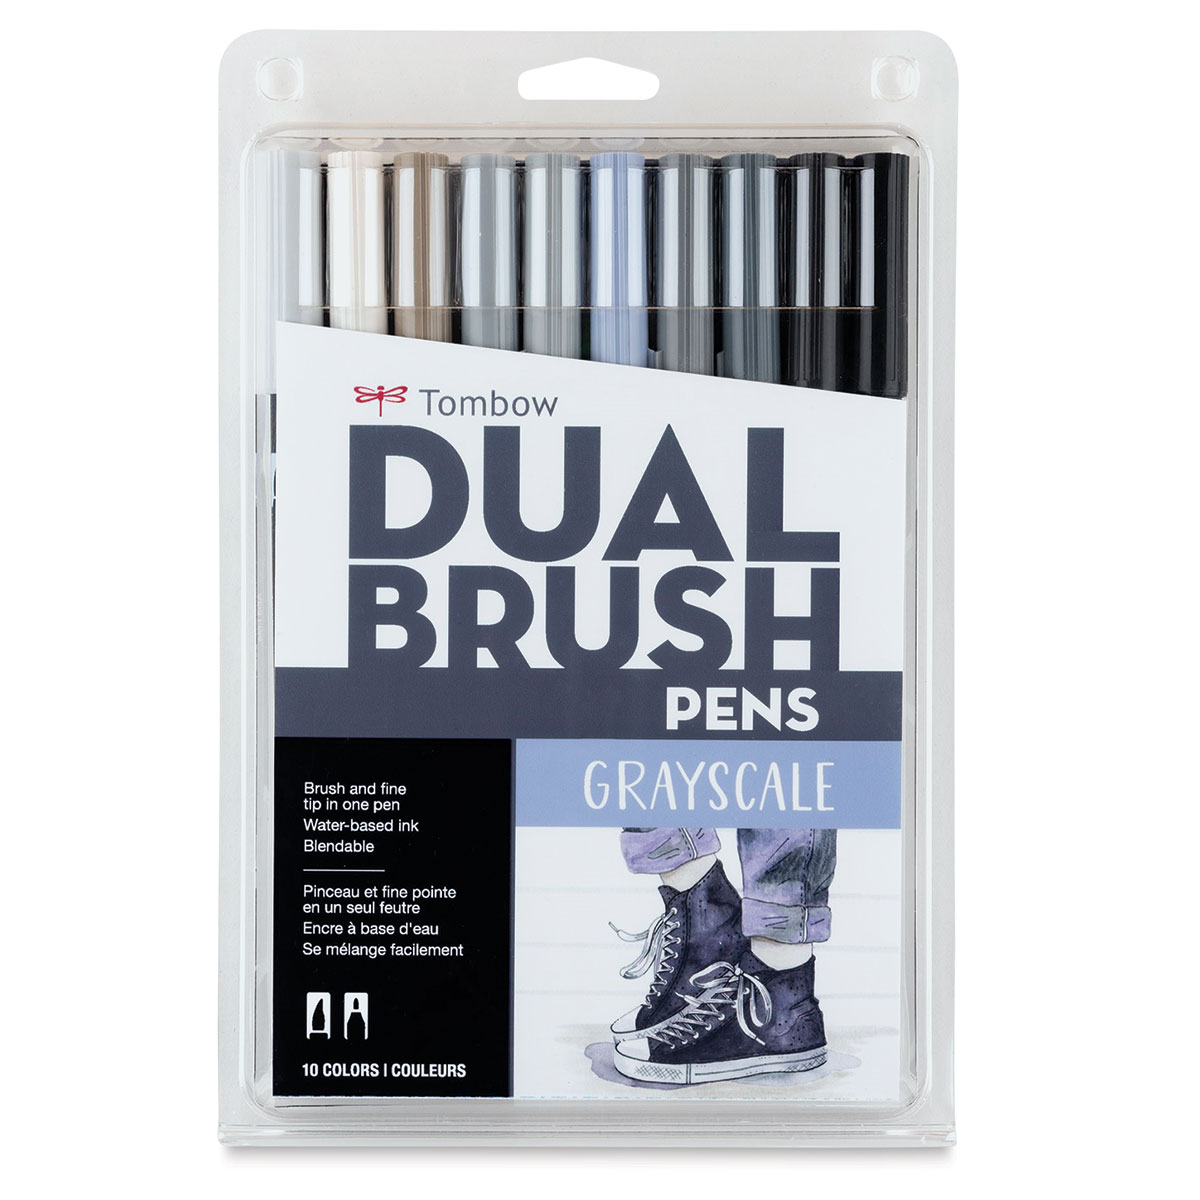 Tombow Dual Brush Pens - Gray Scale Colors, Set of 10